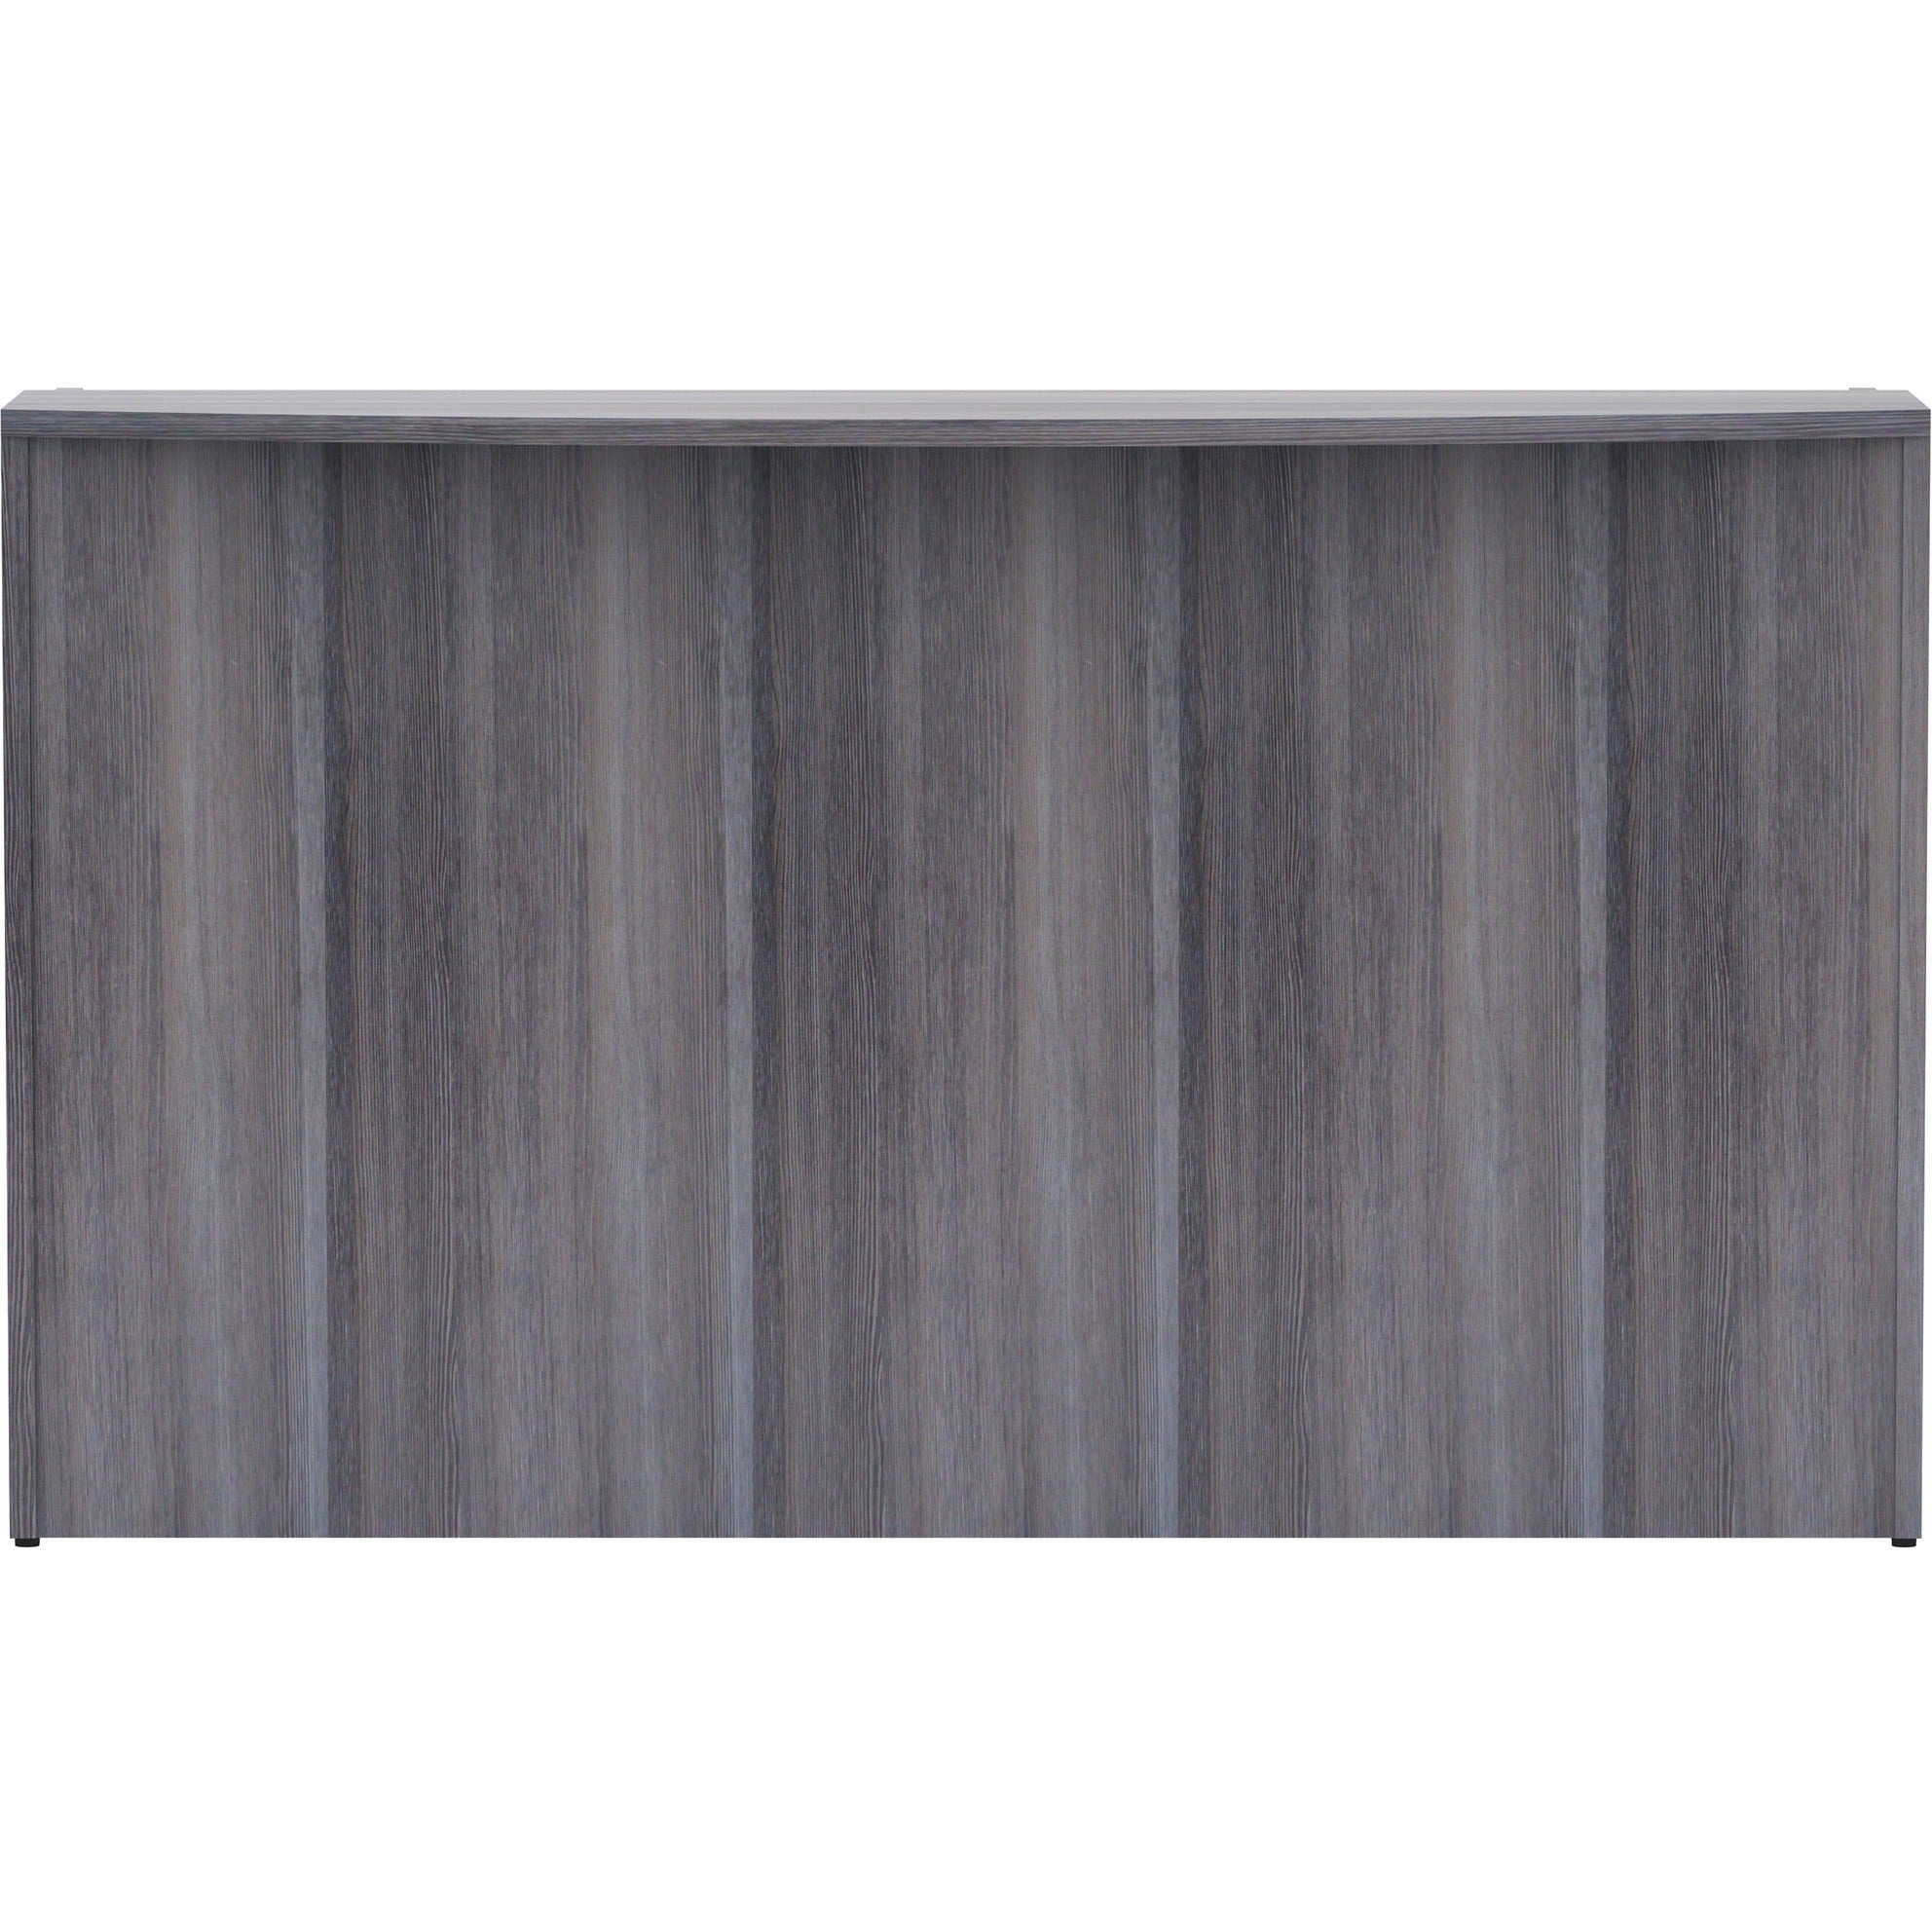 lorell-essentials-series-front-reception-desk-72-x-36425-desk-1-top-finish-weathered-charcoal-laminate_llr69595 - 3